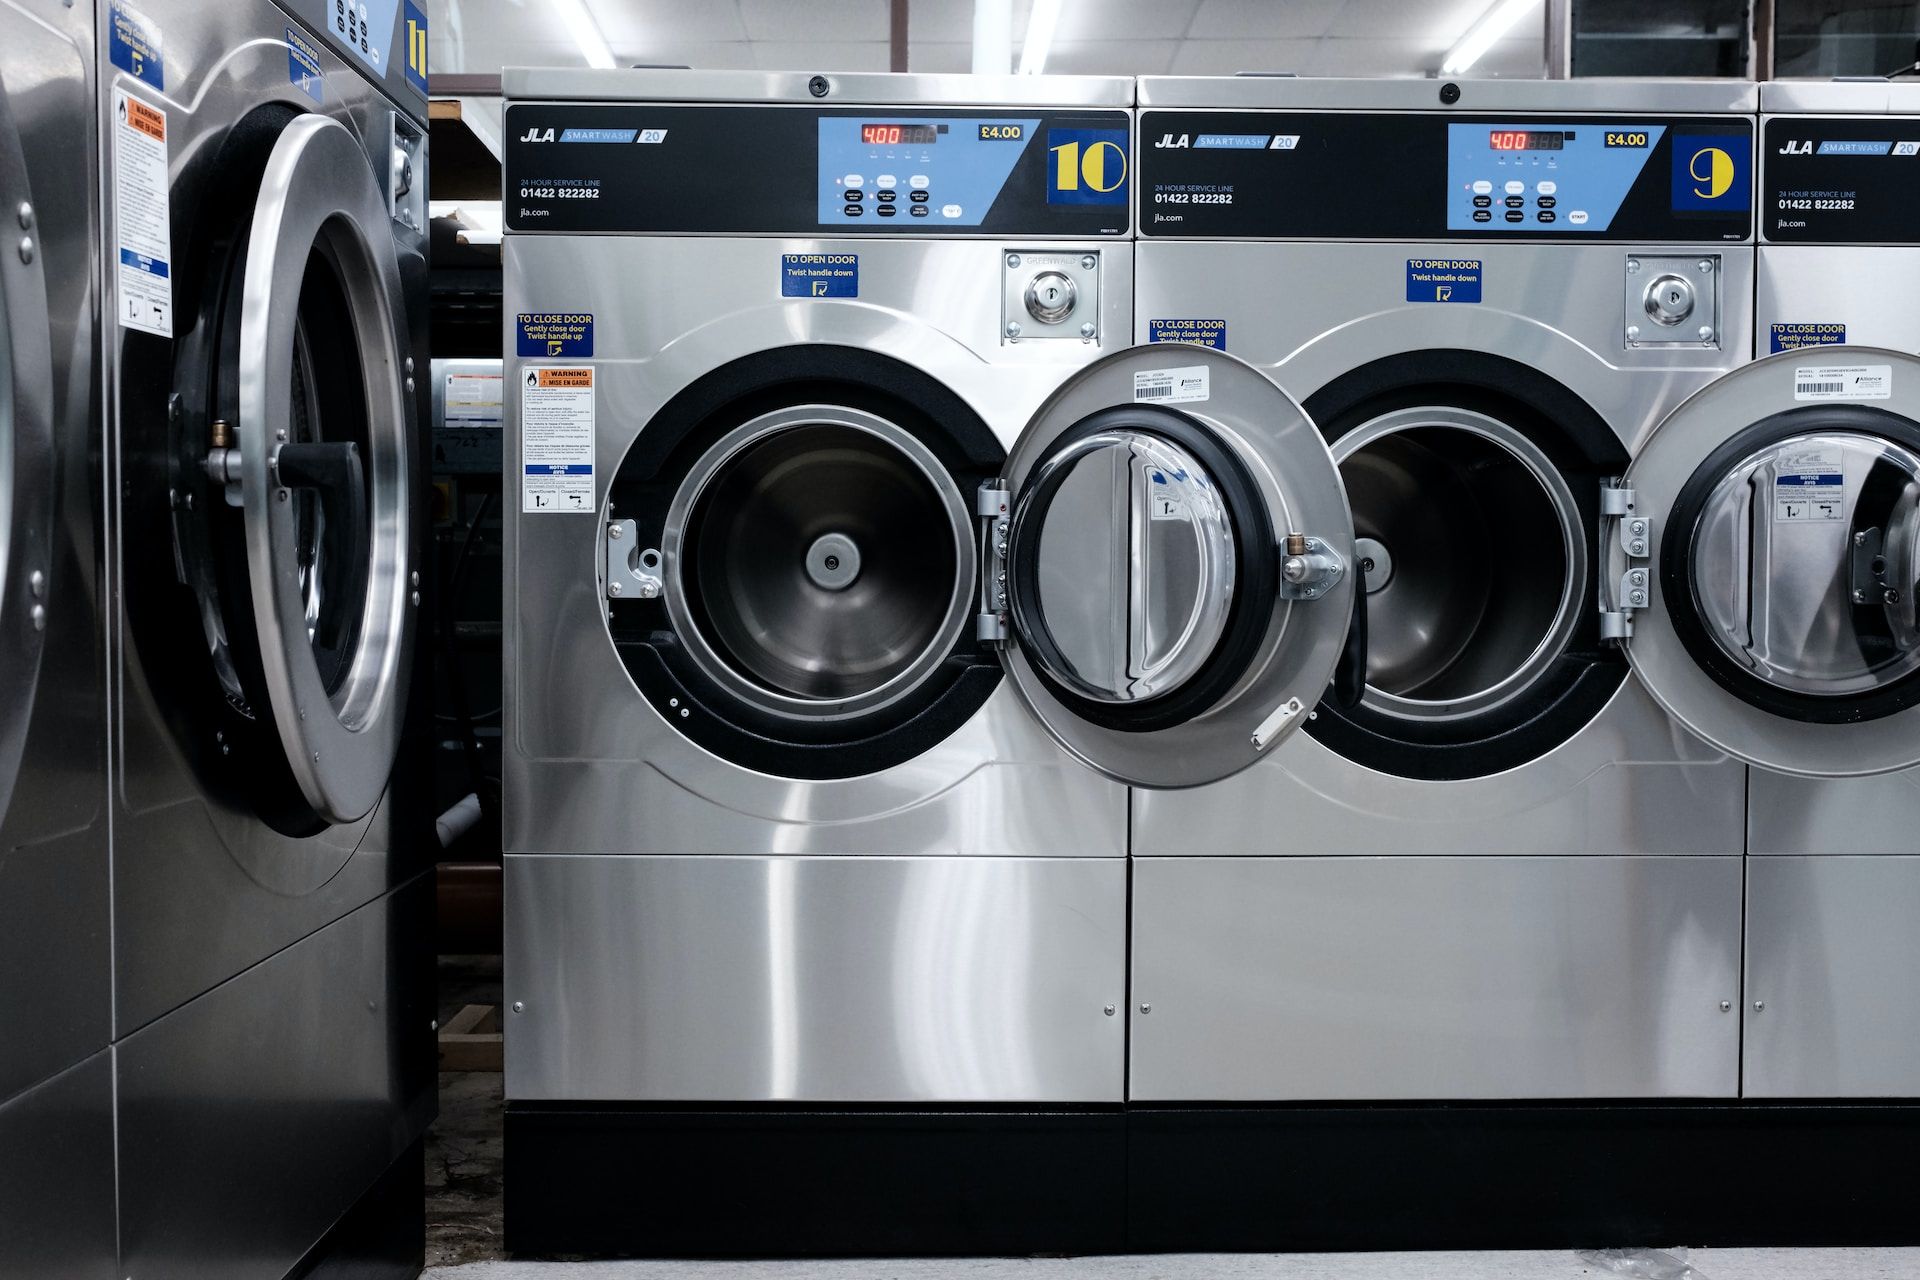 A row of laundry machines